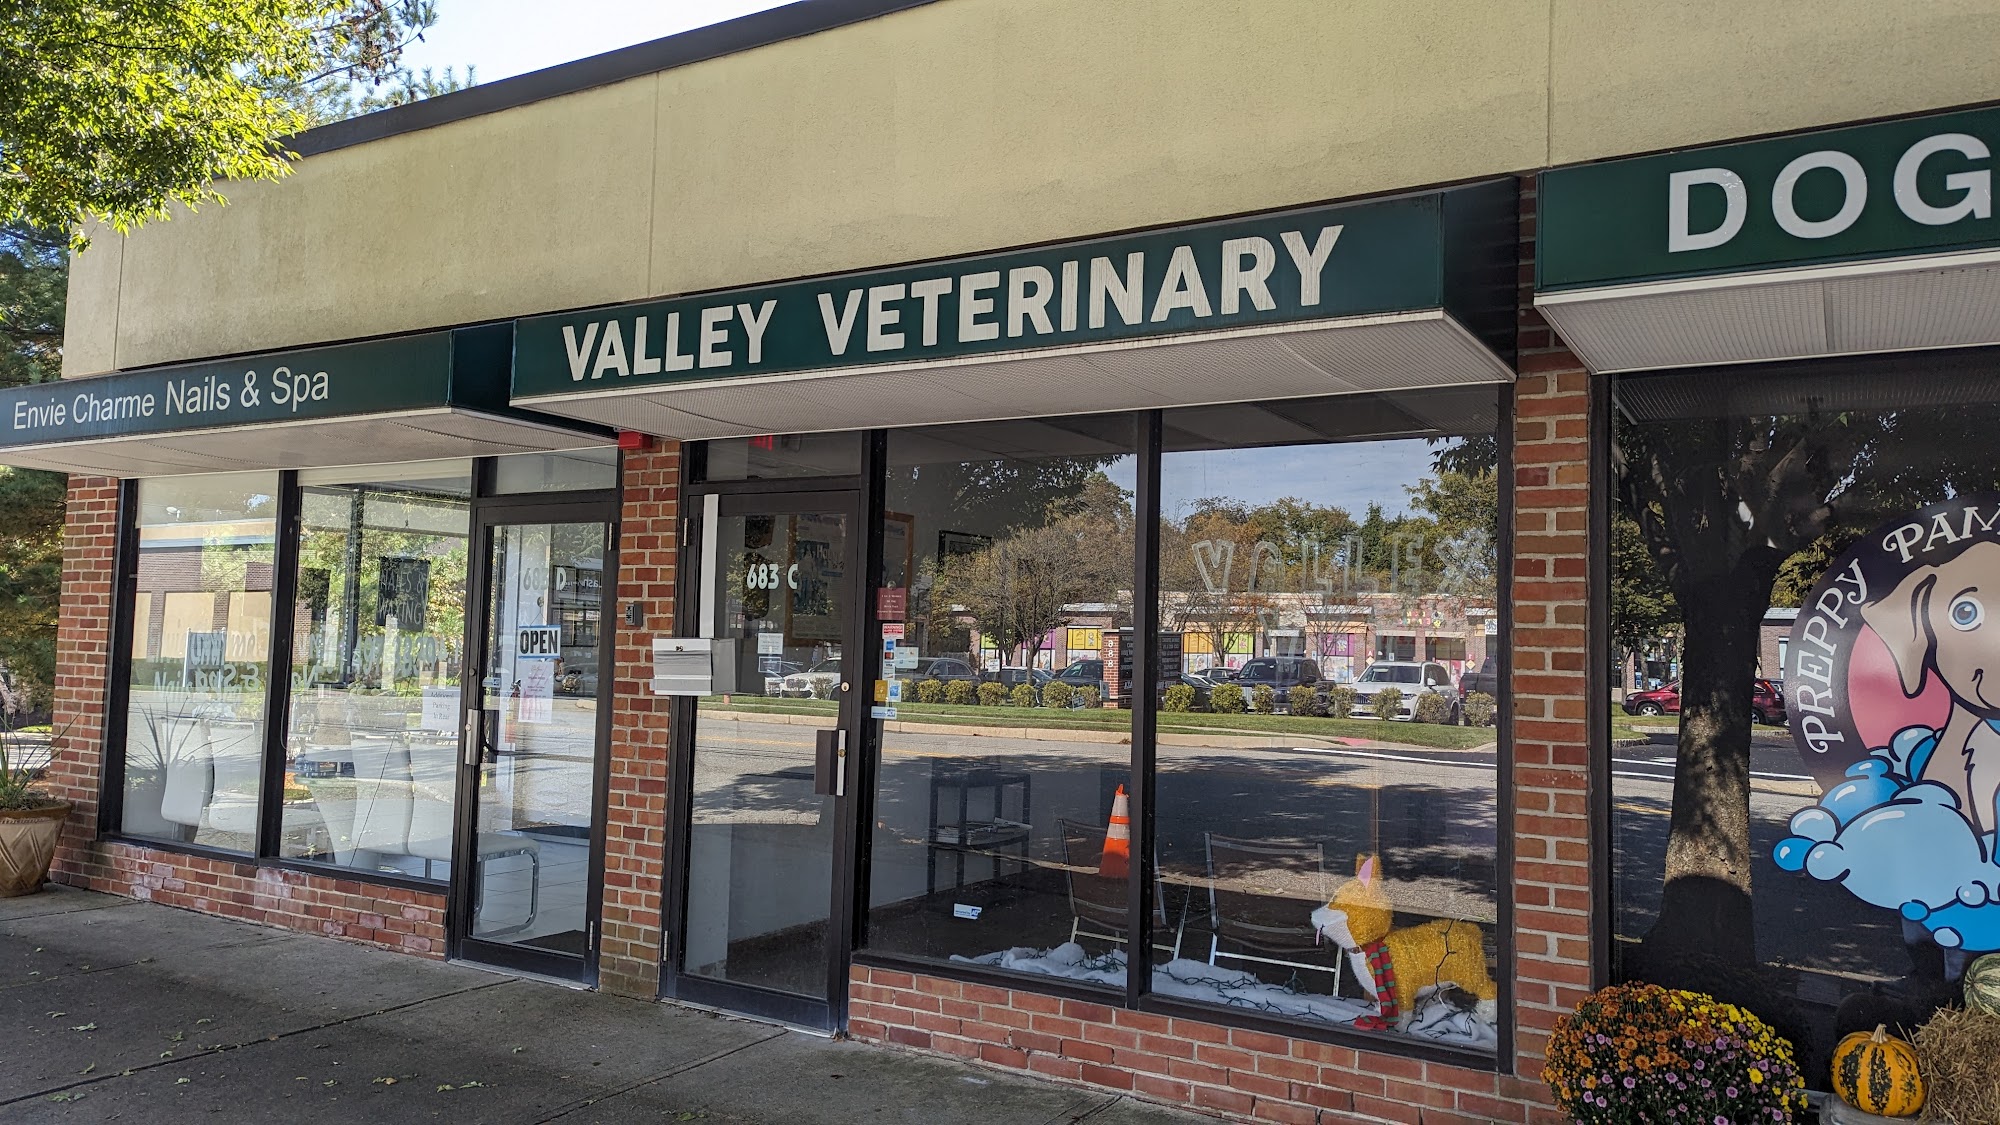 Valley Veterinary 683 C Westwood Ave., River Vale New Jersey 07675